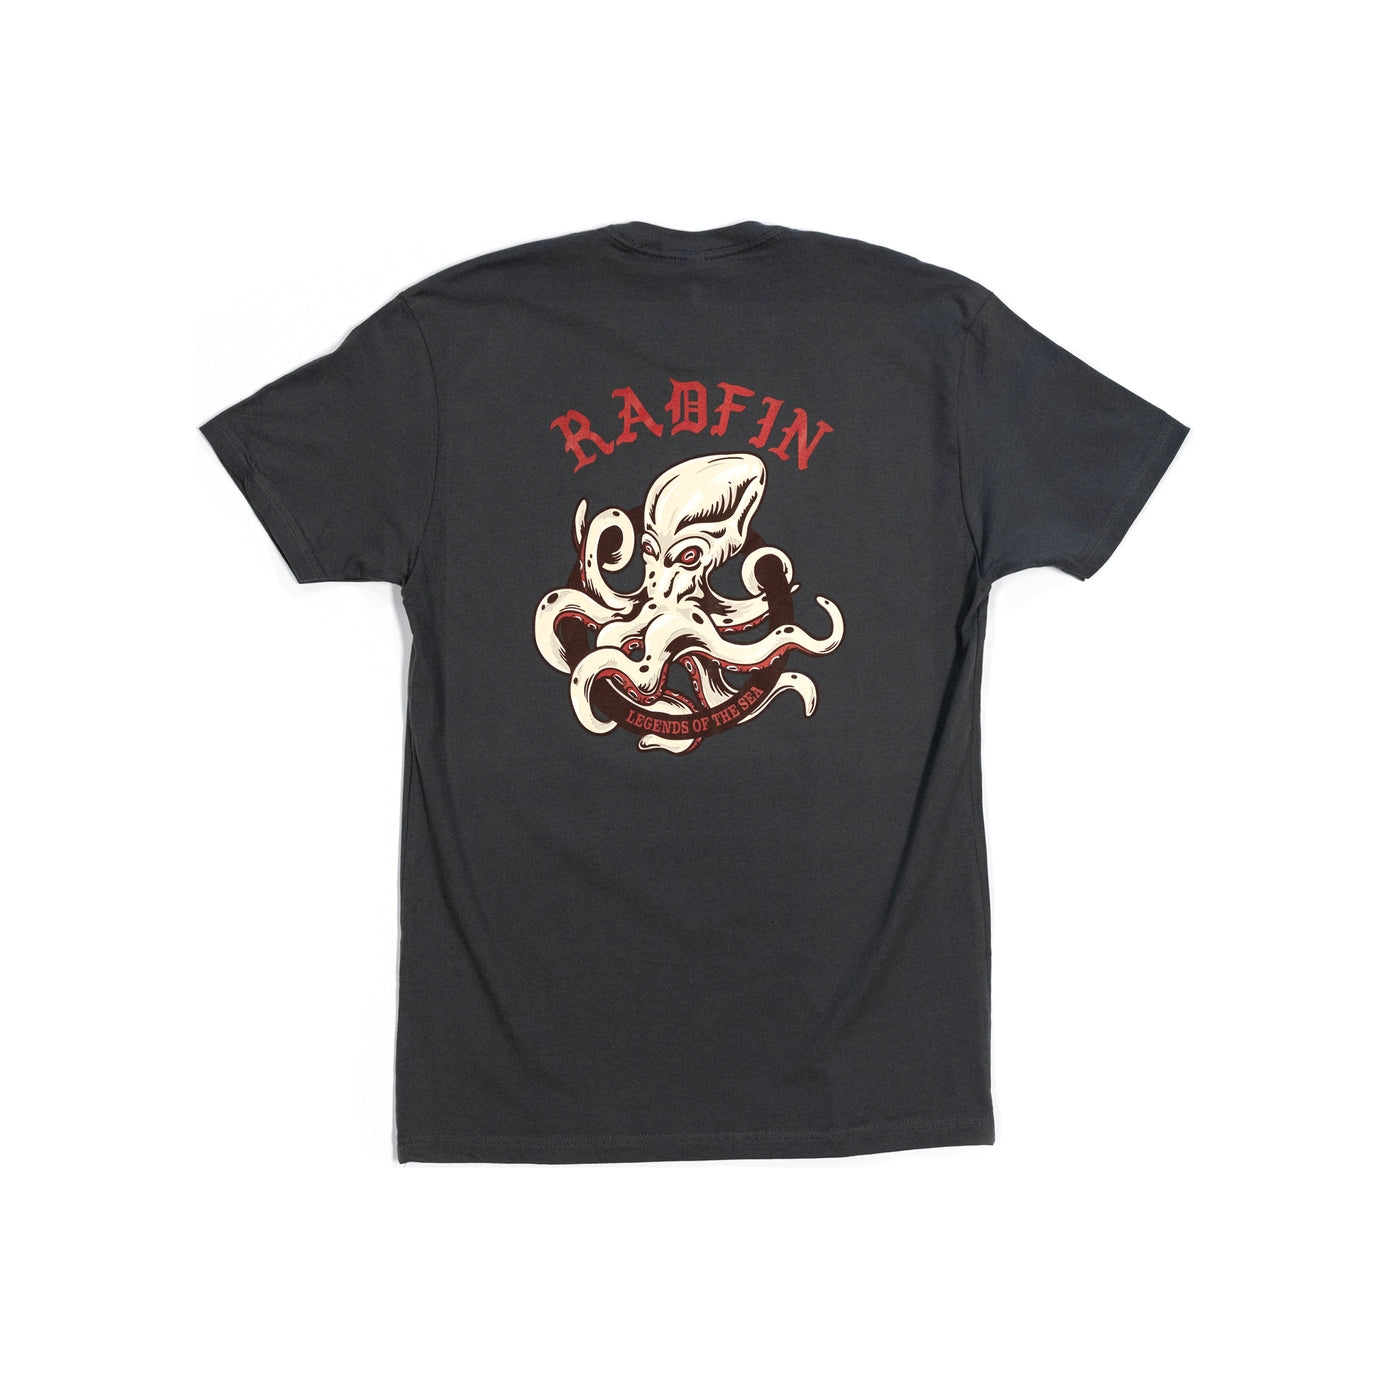 Legends of the Sea Tee